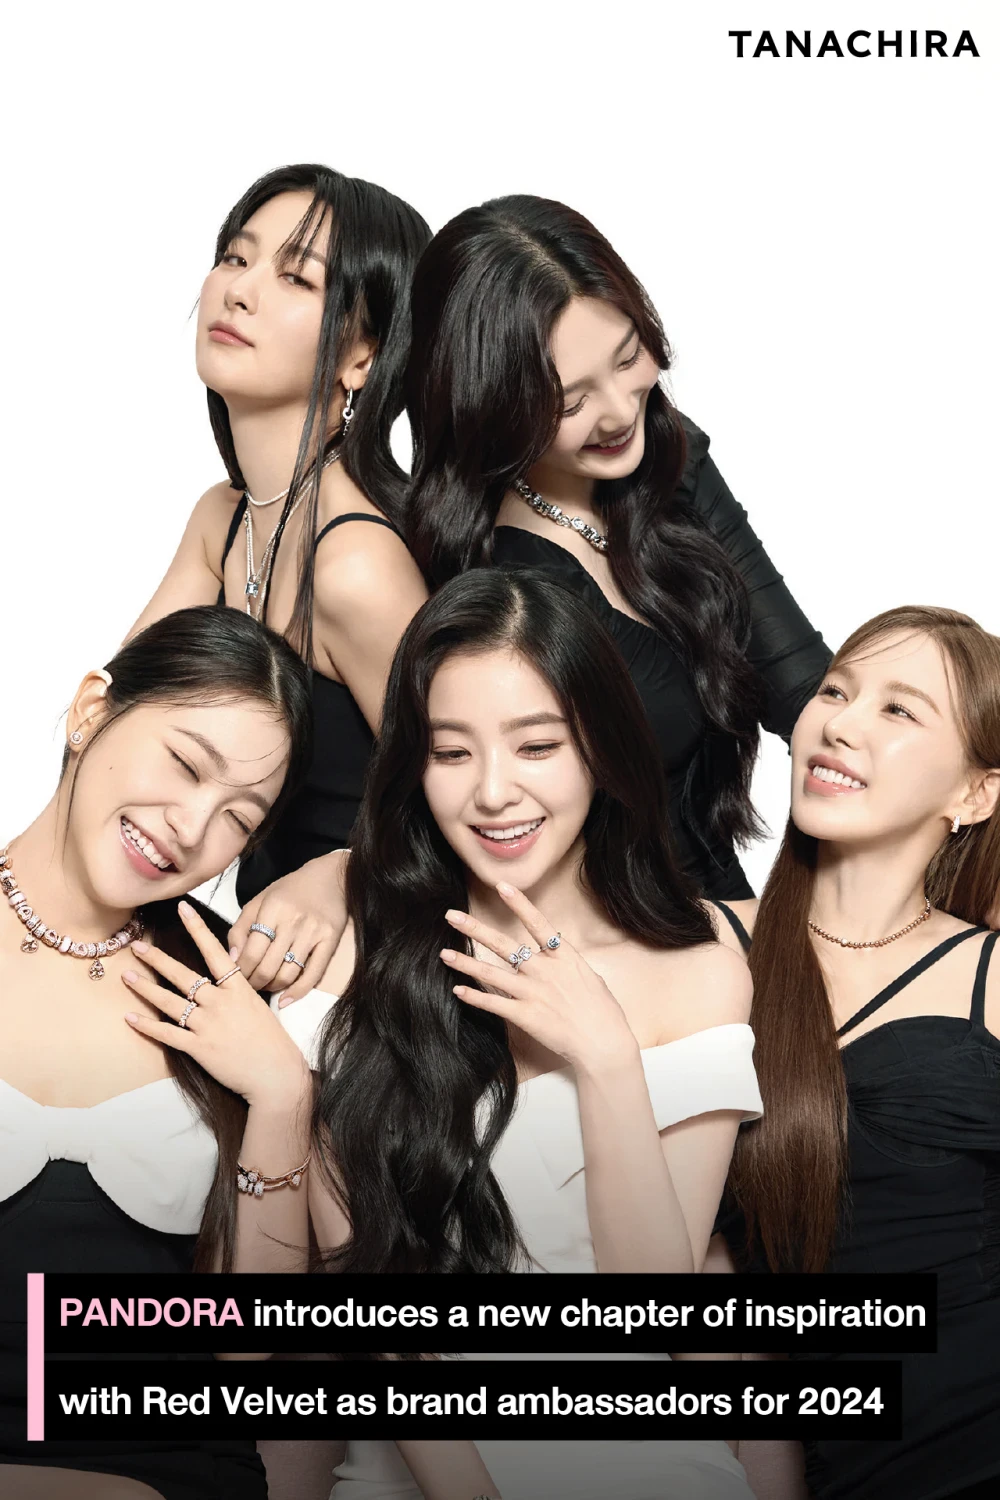 PANDORA introduces a new chapter of inspiration with Red Velvet as brand ambassadors for 2024